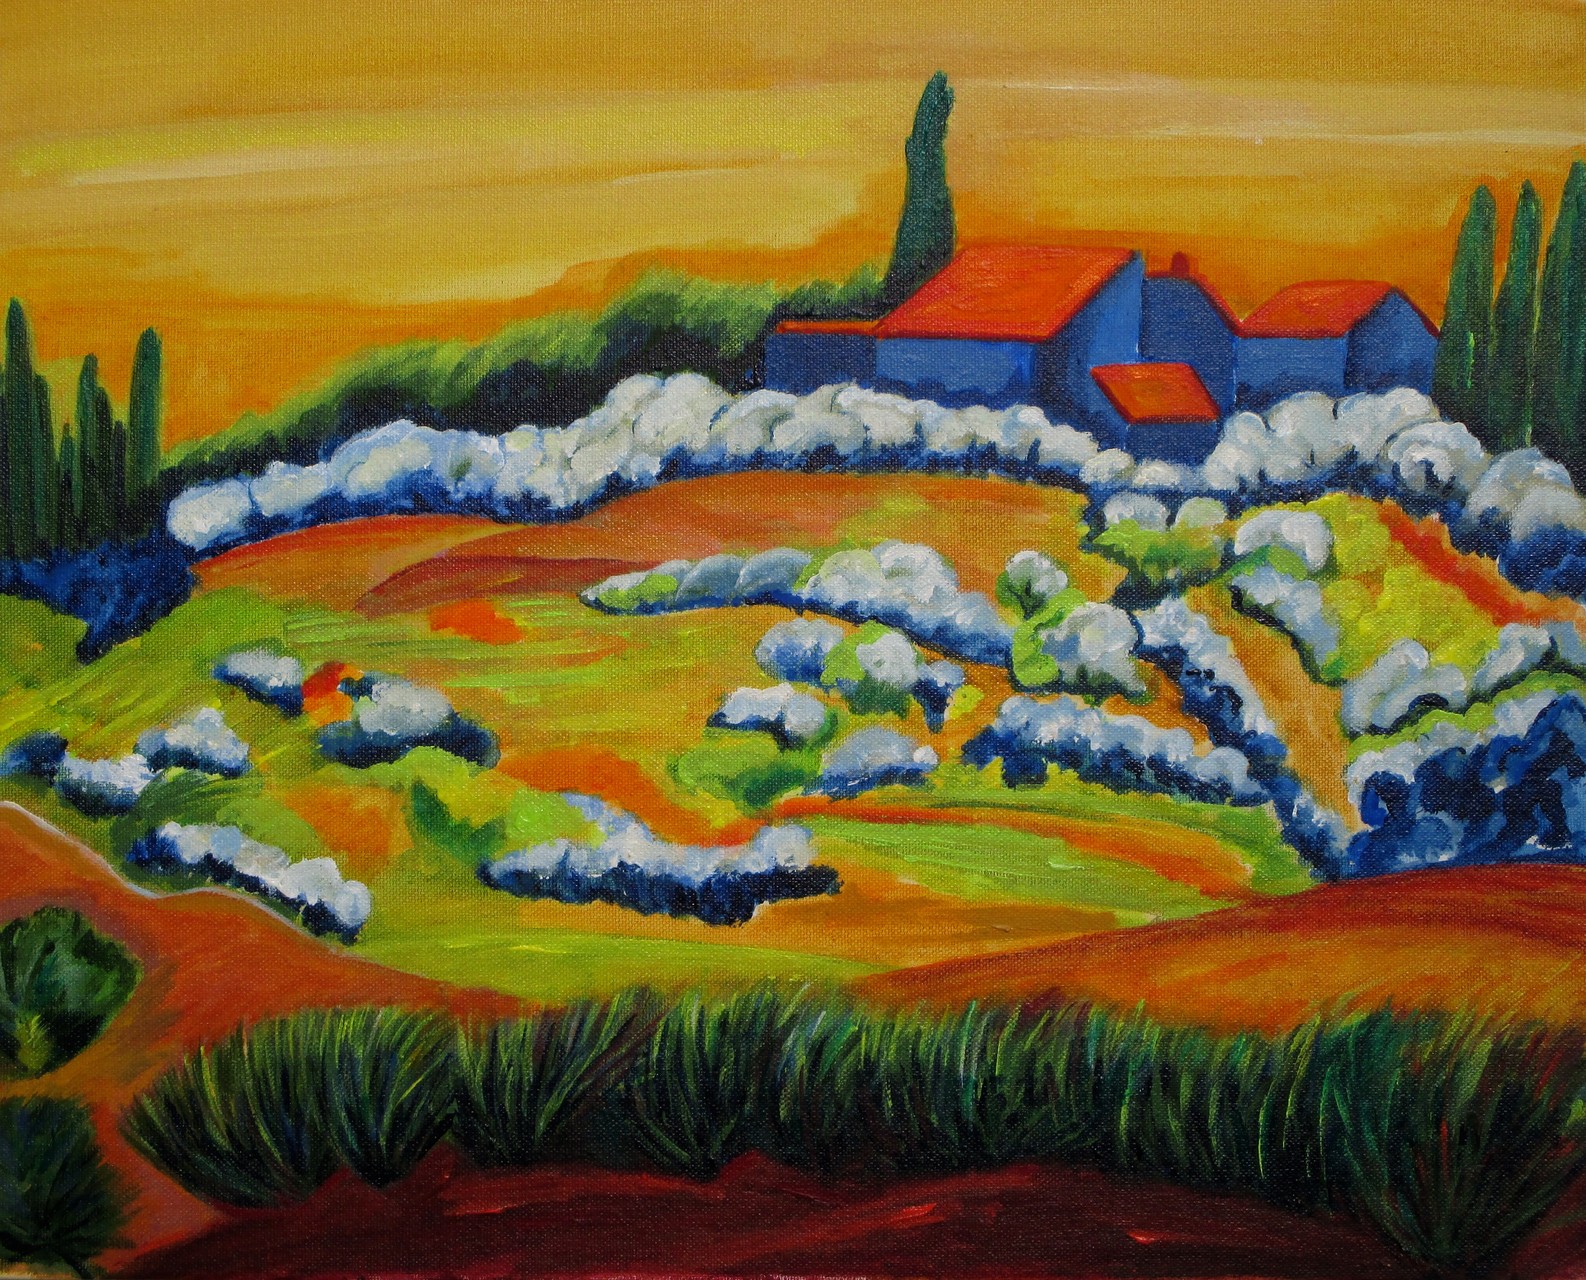 Tuscan Hills, acrylic on paper, 20 x 16